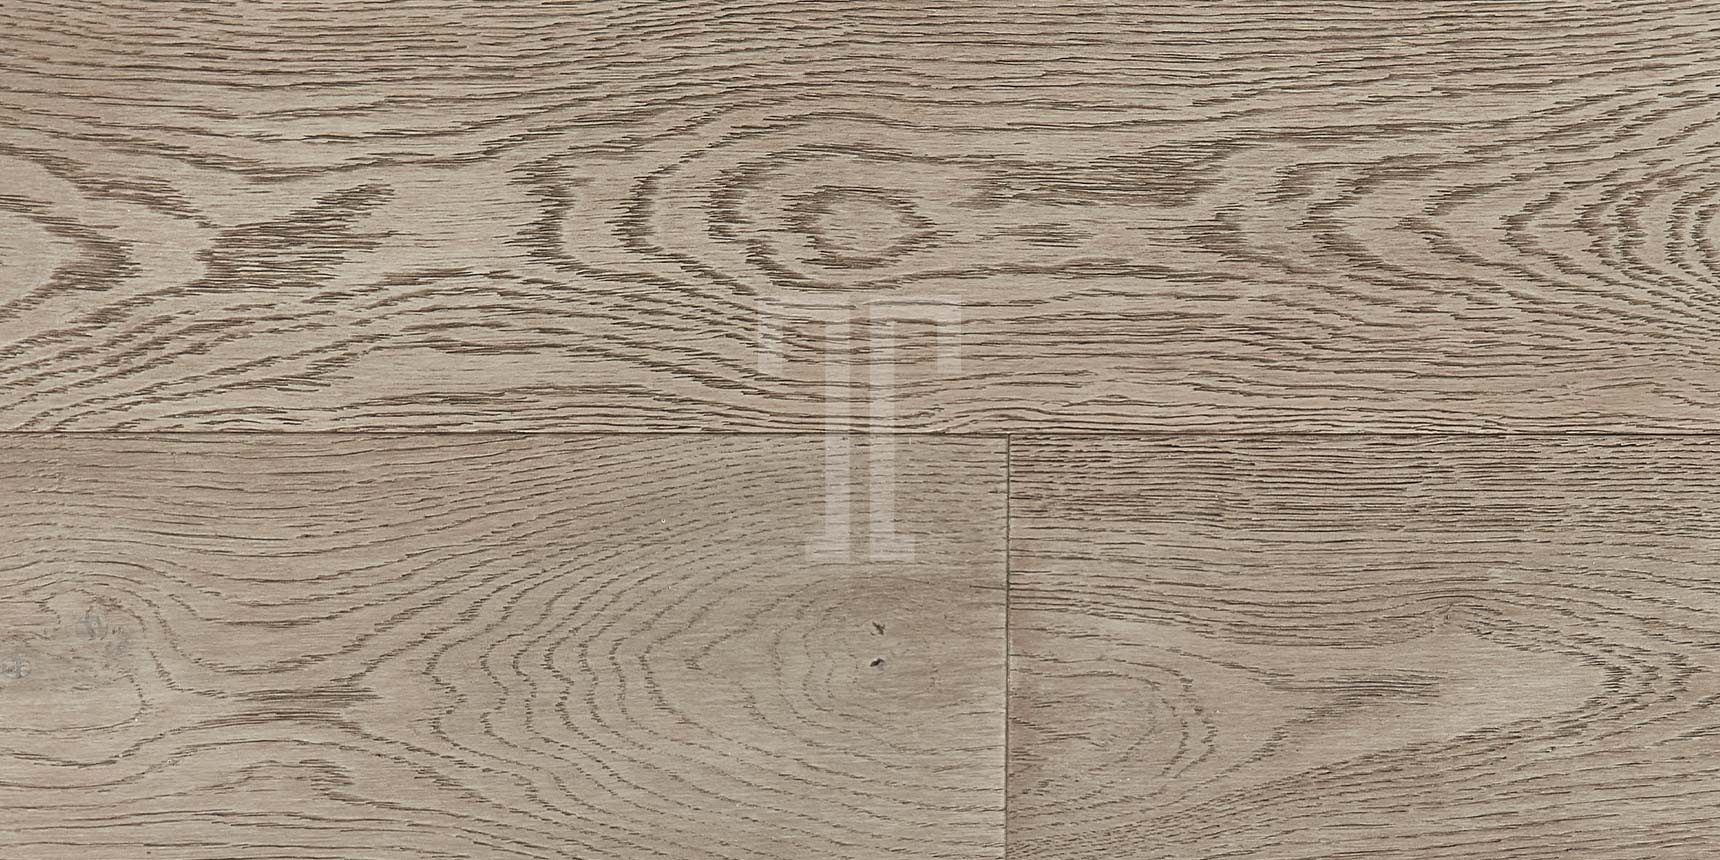 Ted Todd Project 14mm Plank Engineered Flooring